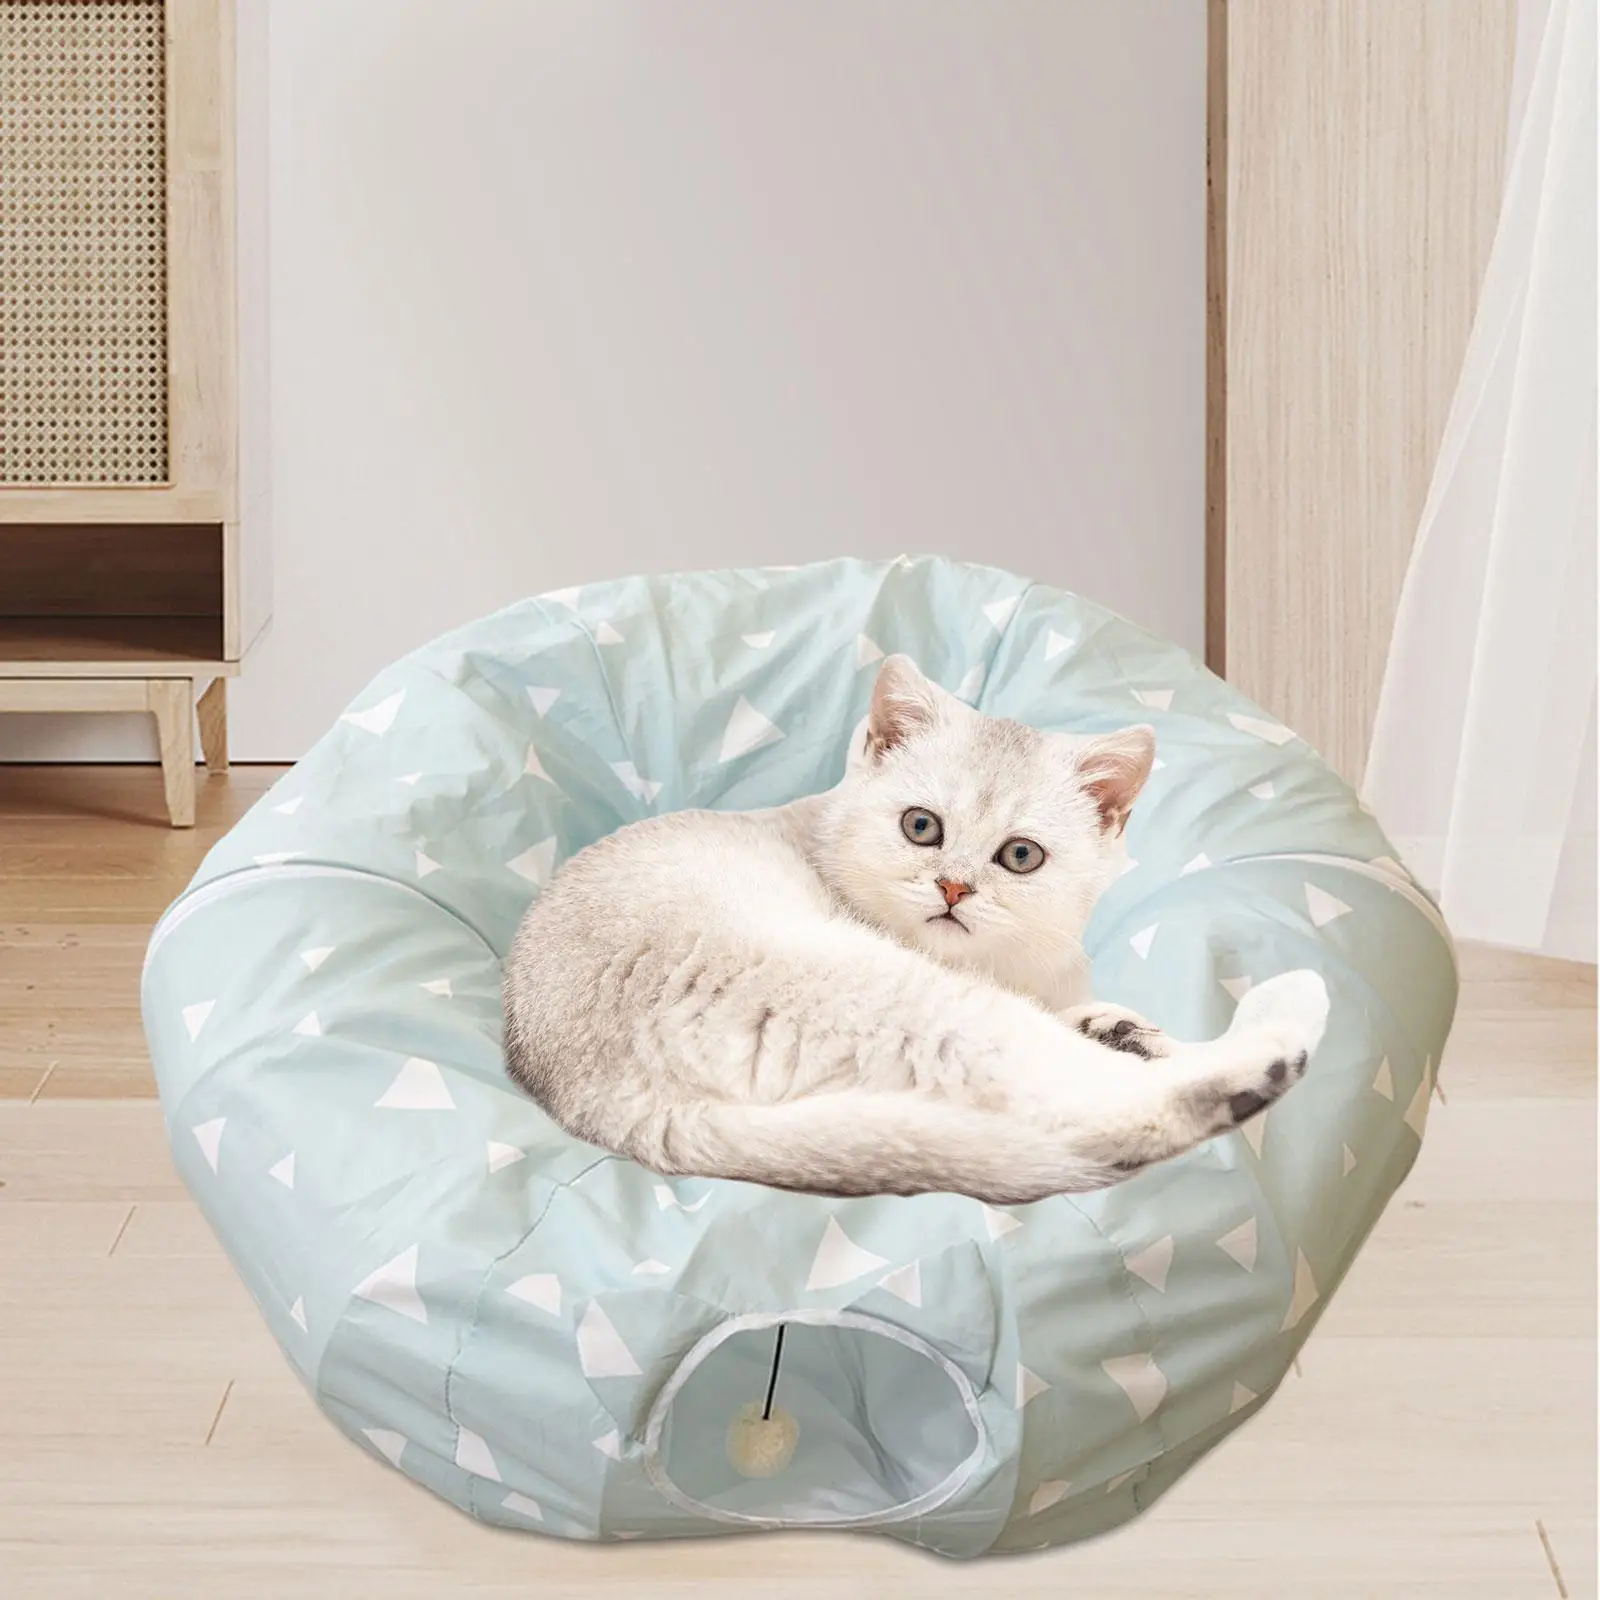 Cat Tunnel Collapsible Playing with Hanging Ball Removable Pet Bed Interactive Toy for Bunny Rabbit Small Animals Ferret Puppy